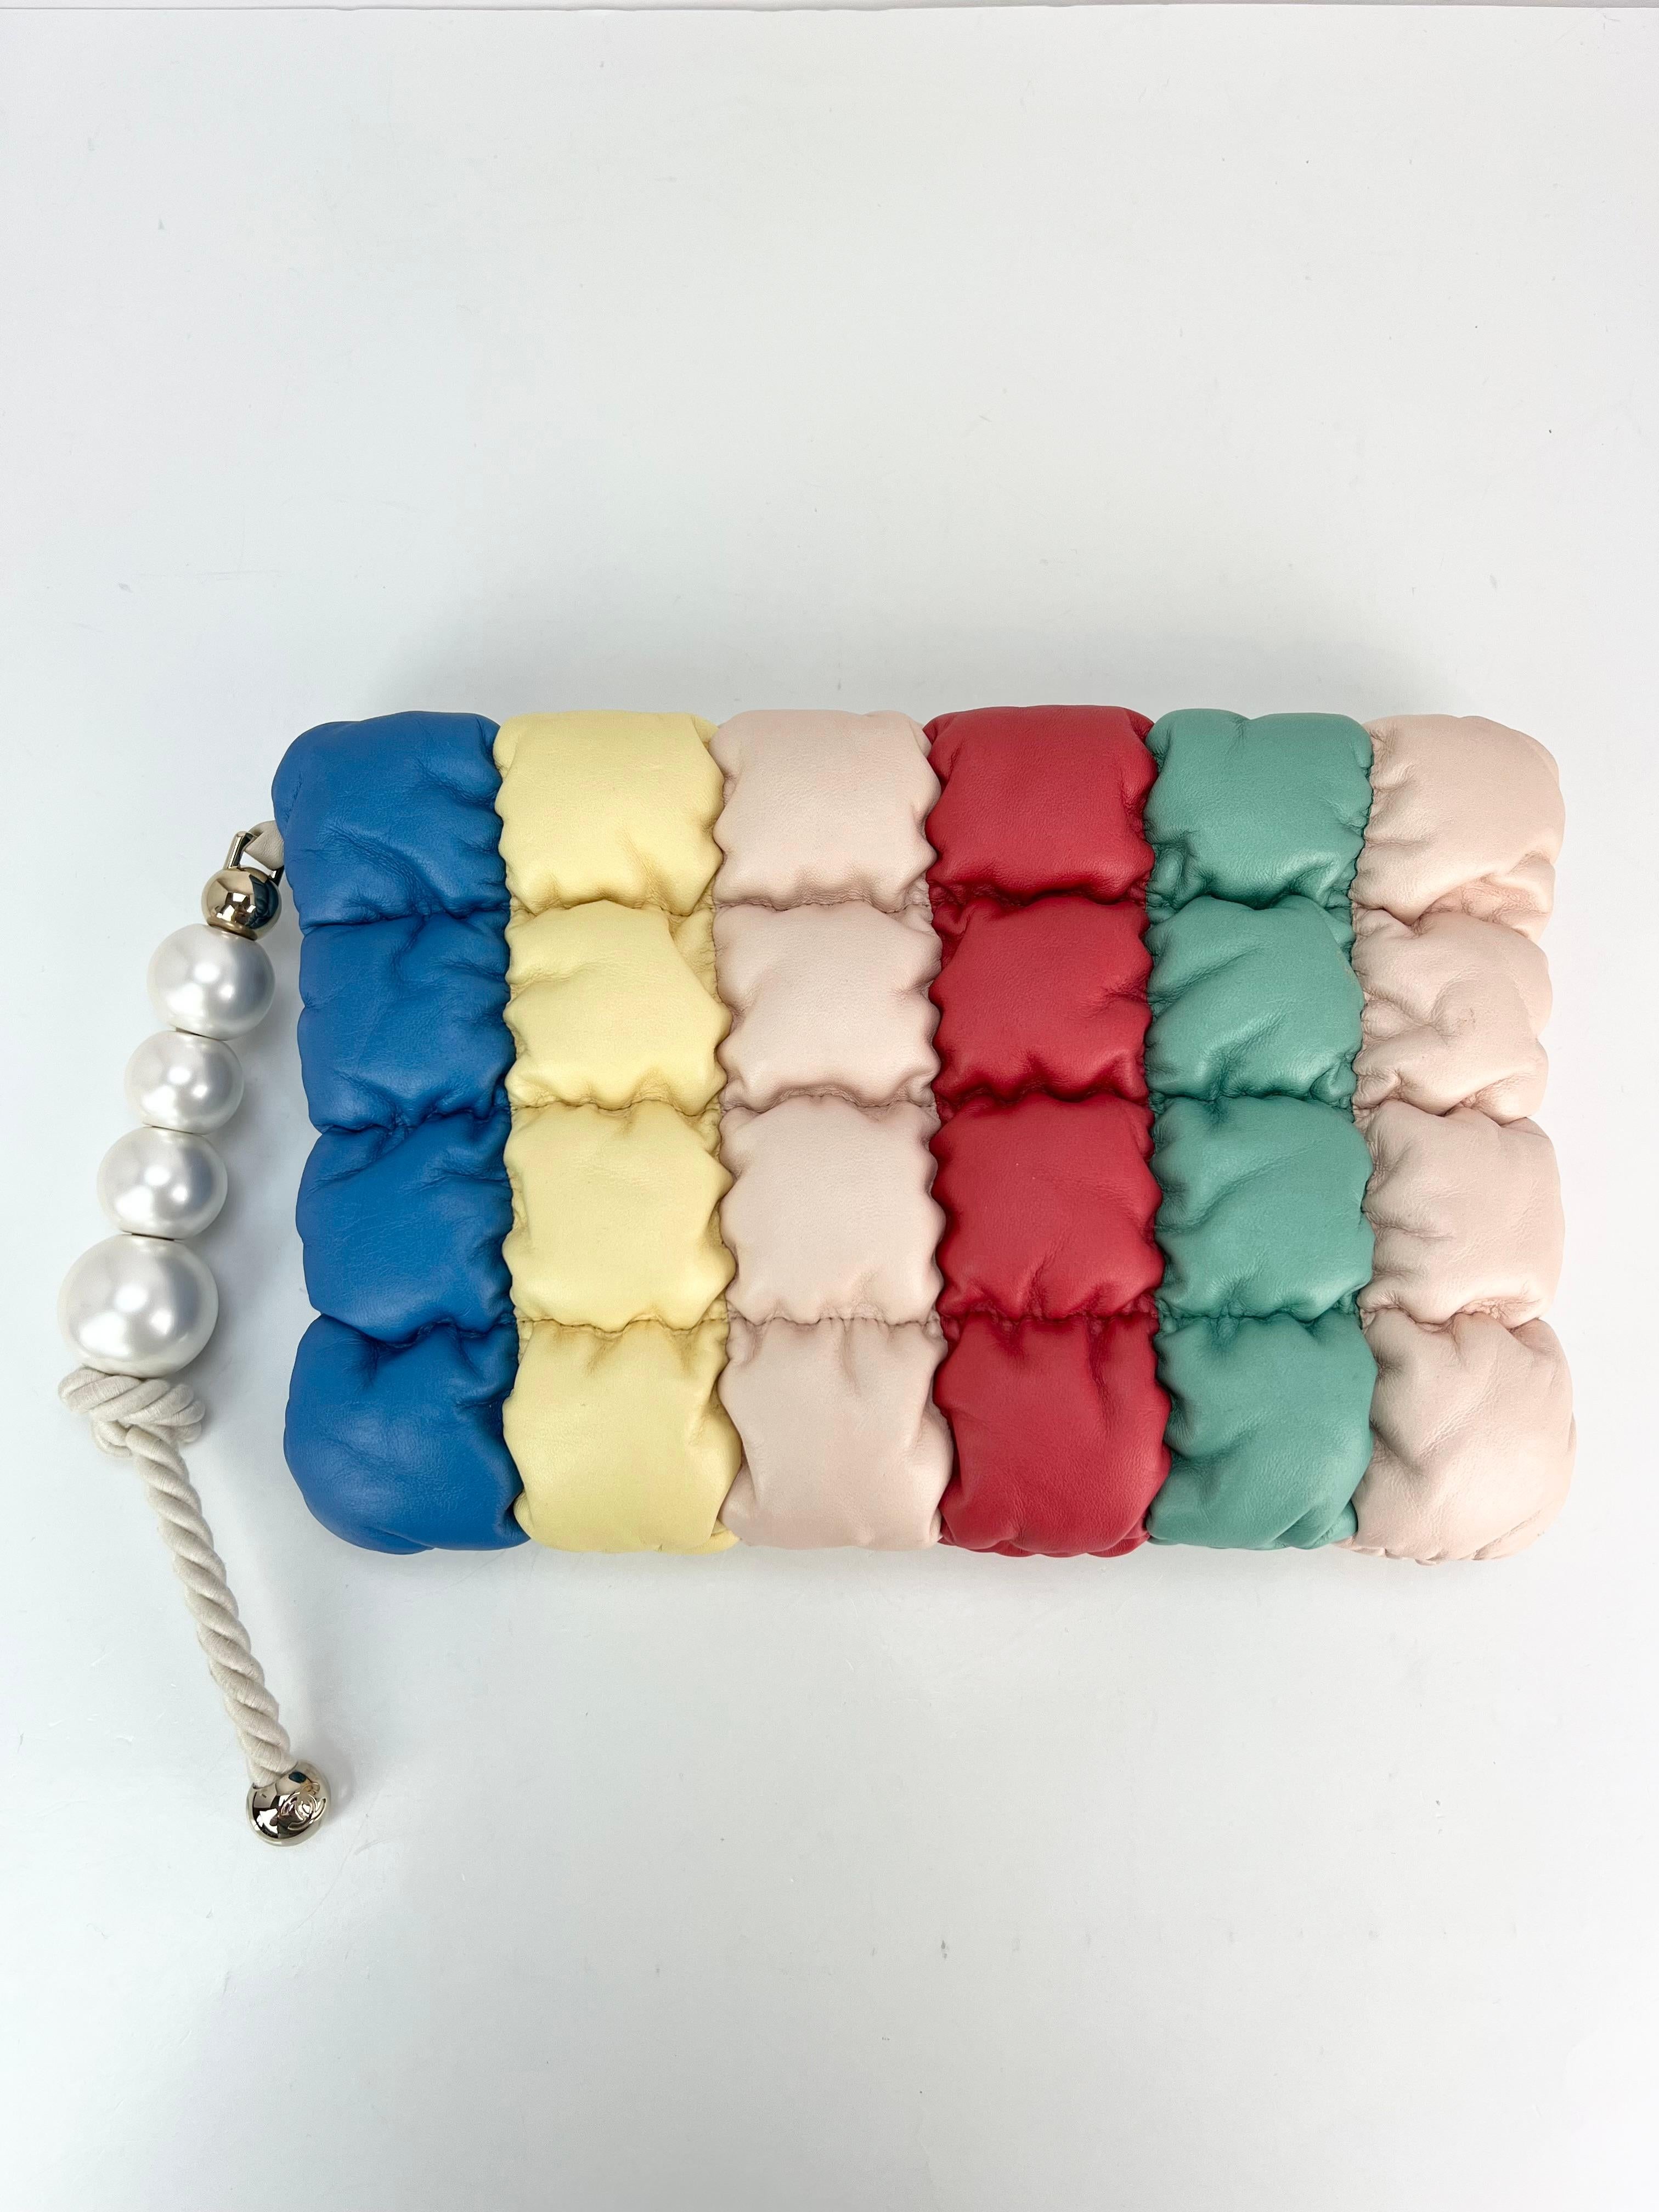 Pre-Owned  100% Authentic
Chanel 2019 Multicolor Lambskin Faux Pearls Clutch Bag 
This is a Very Rare bag, If you are looking for
magnificent then this could be your Clutch! 
RATING   A/B   very good. shows very little signs of use
MATERIAL 